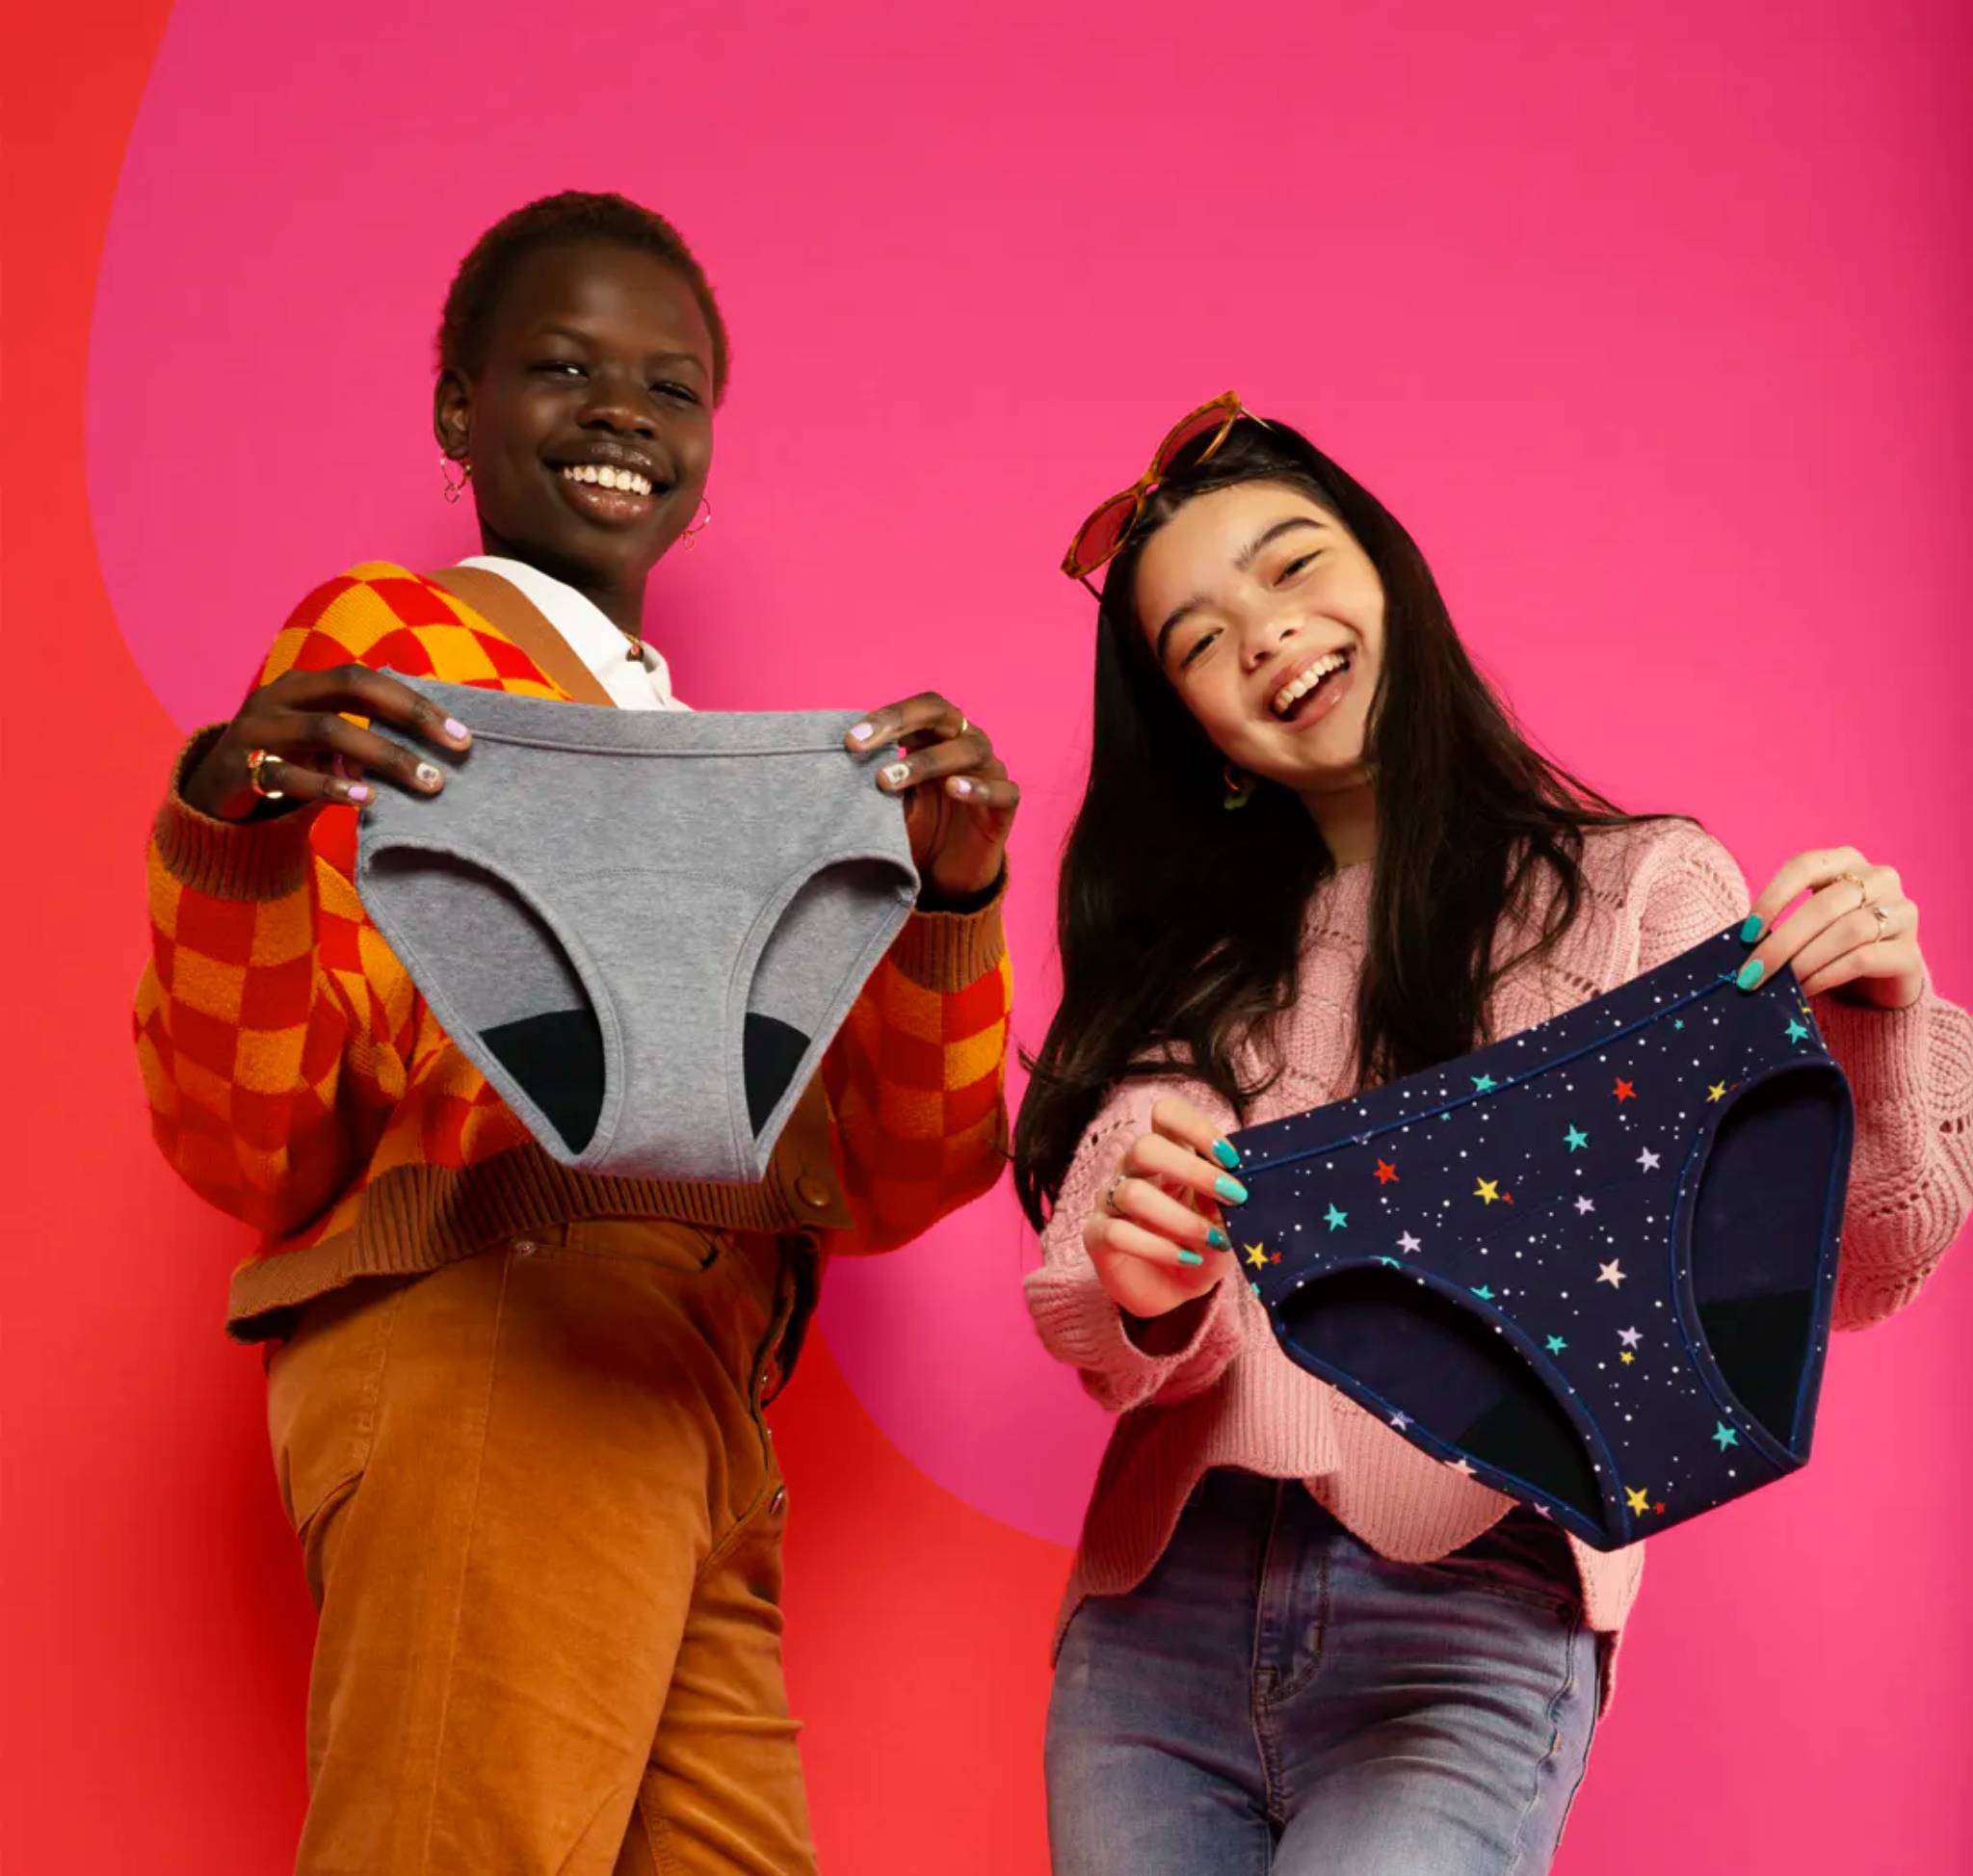 How are teens transforming the menstruation market?